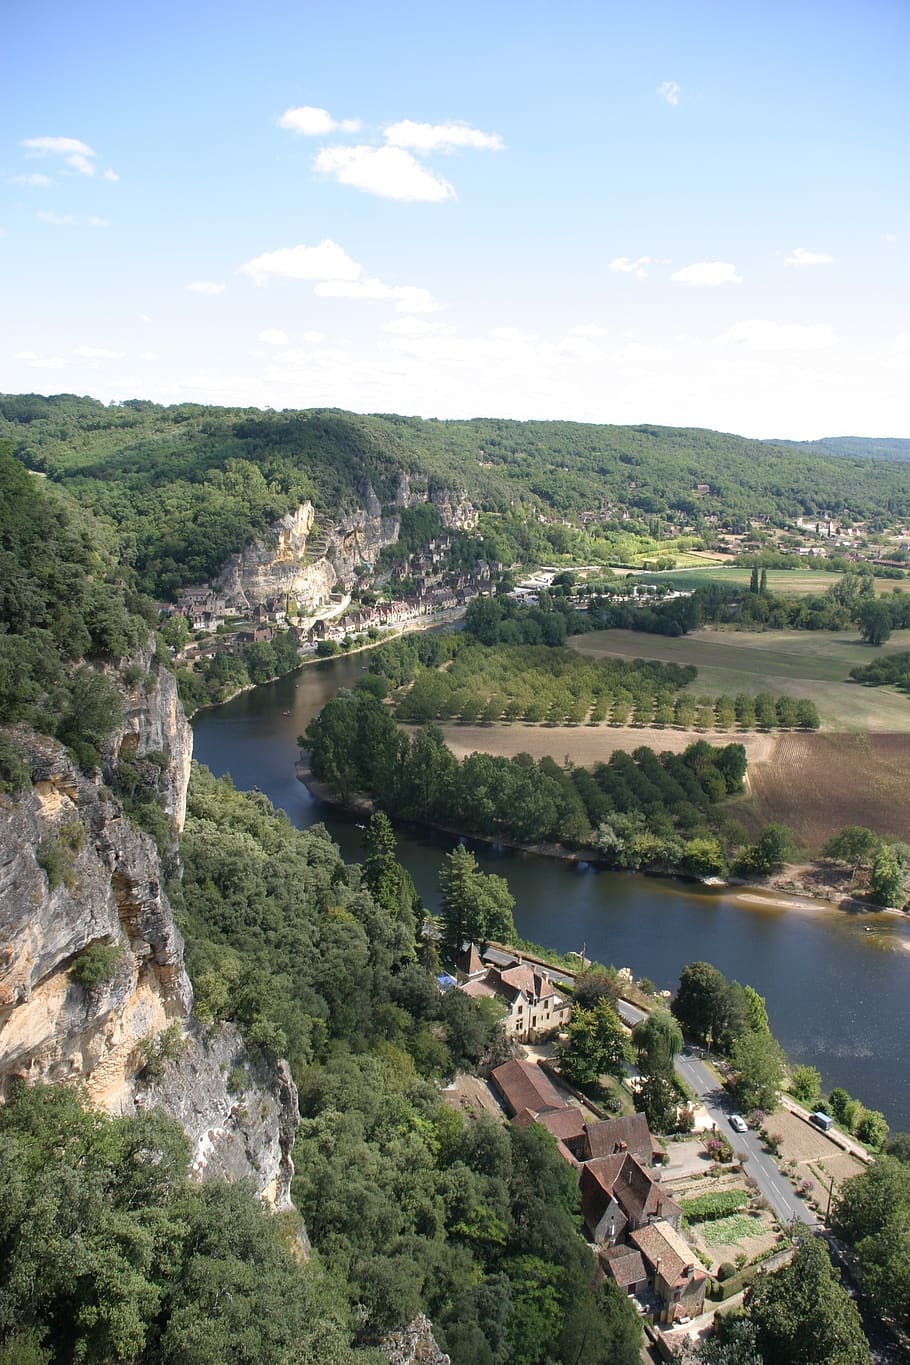 dordogne, river, landscape, france, south of france, water, sky, scenics - nature, environment, tree